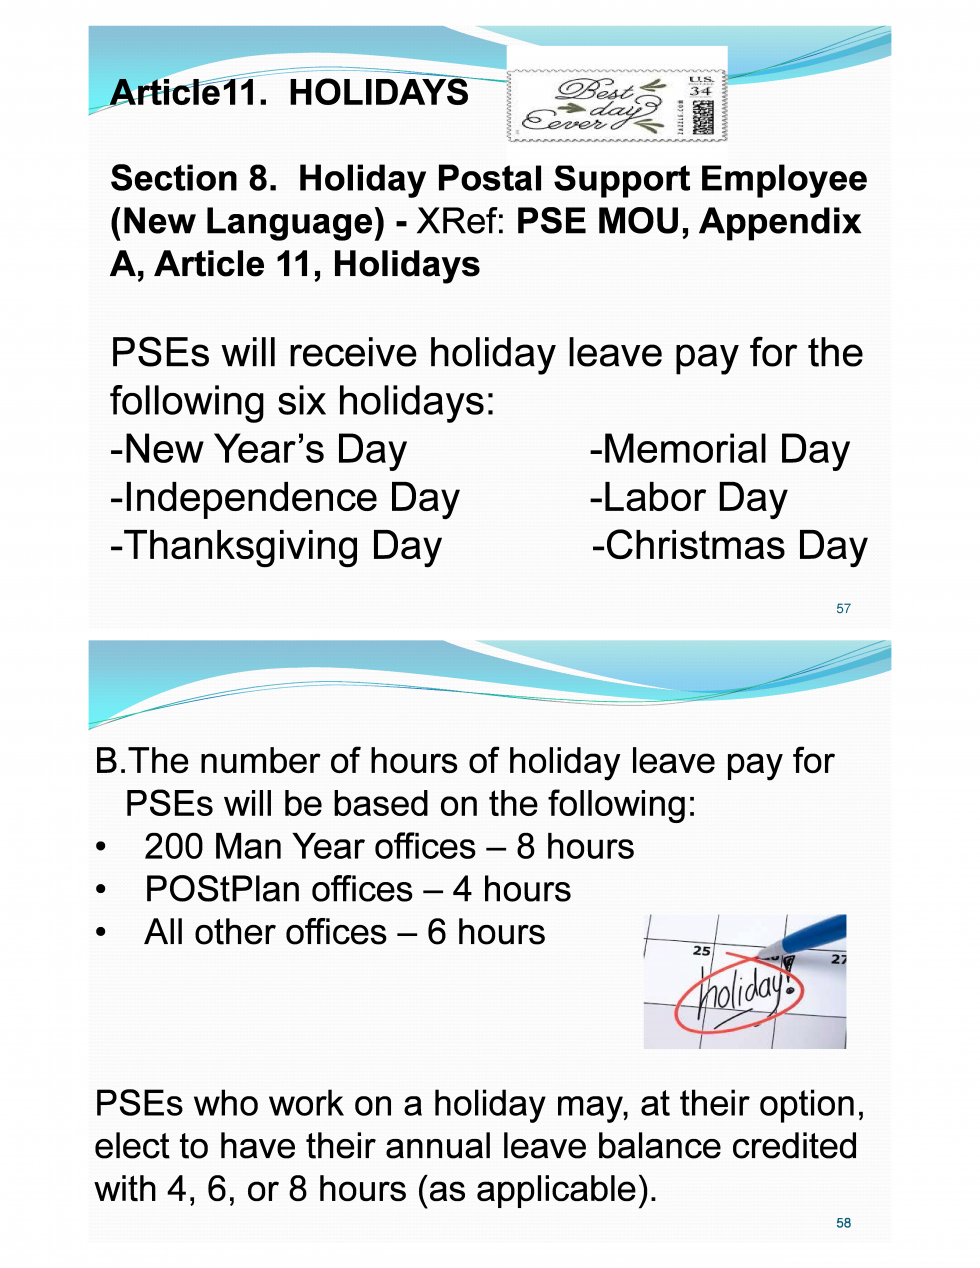 PSE Holiday Leave Pay.png